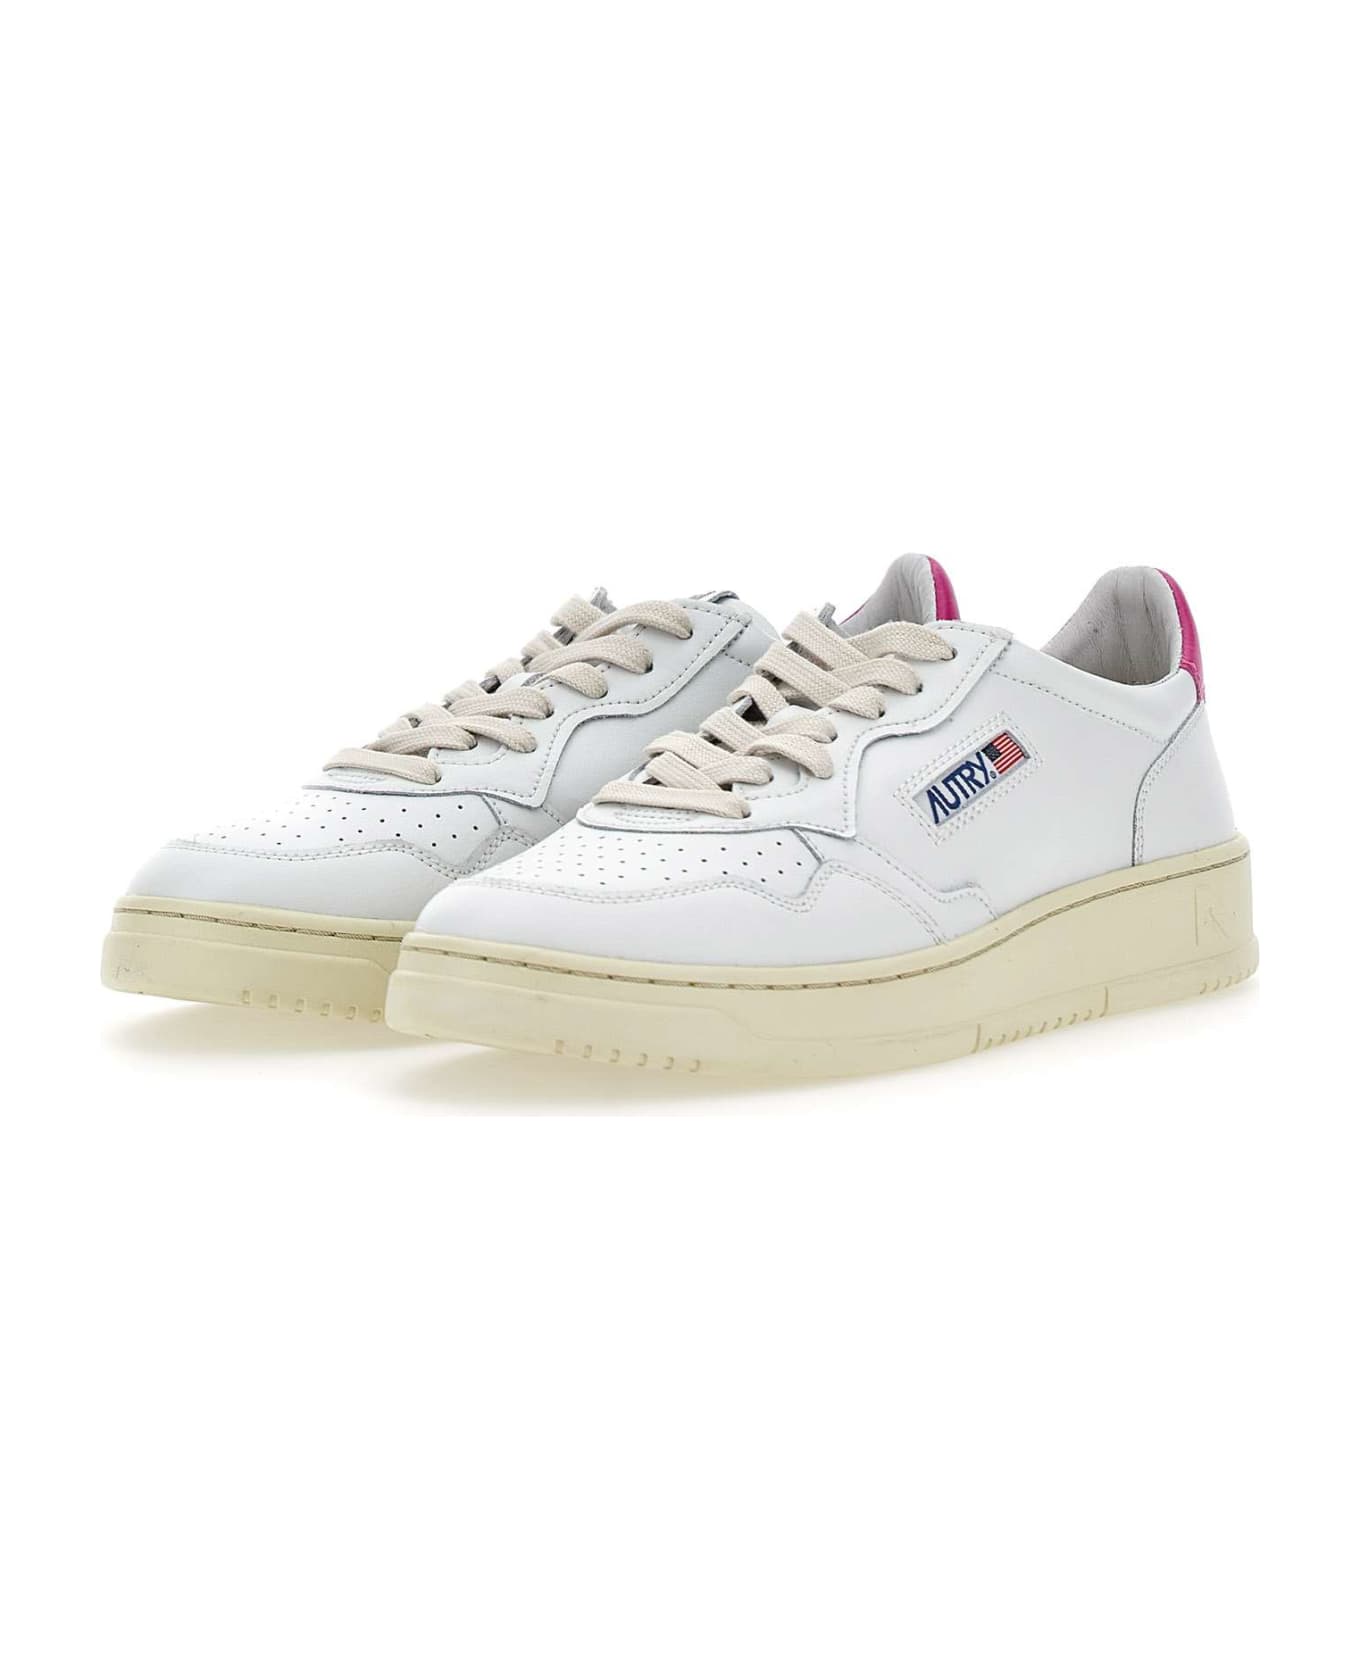 Autry 'll42' Leather Sneakers - WHITE/FUCHSIA